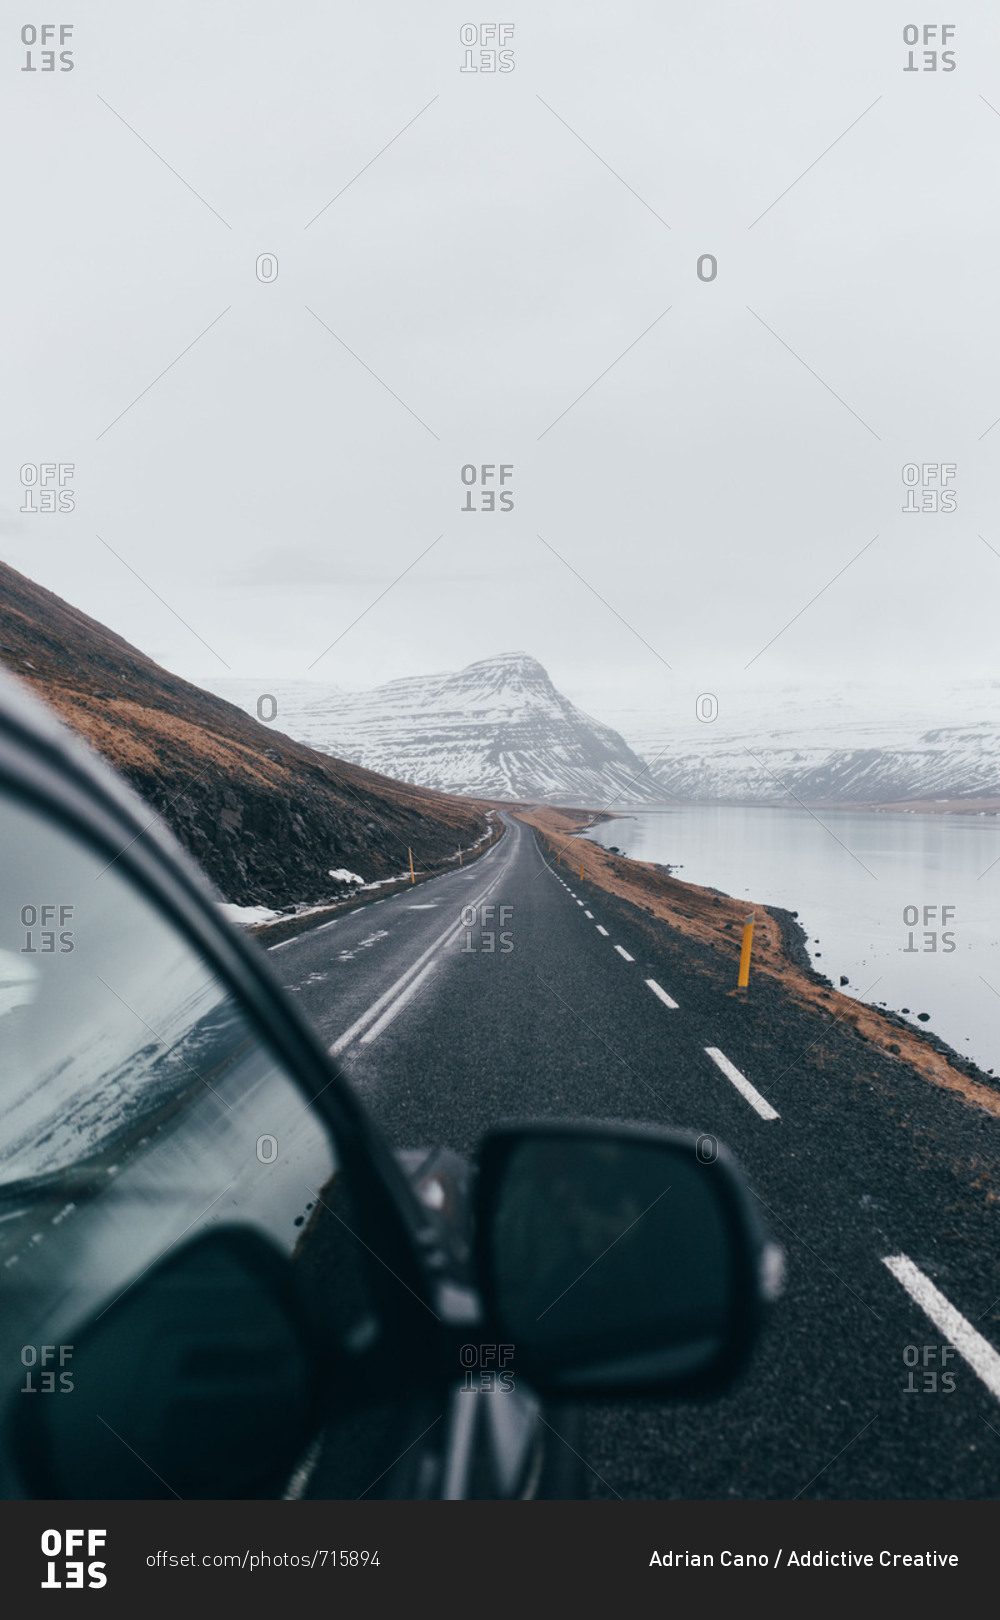 Black car driving down long road alongside cold lake with gloomy gray mountains on background in Iceland.